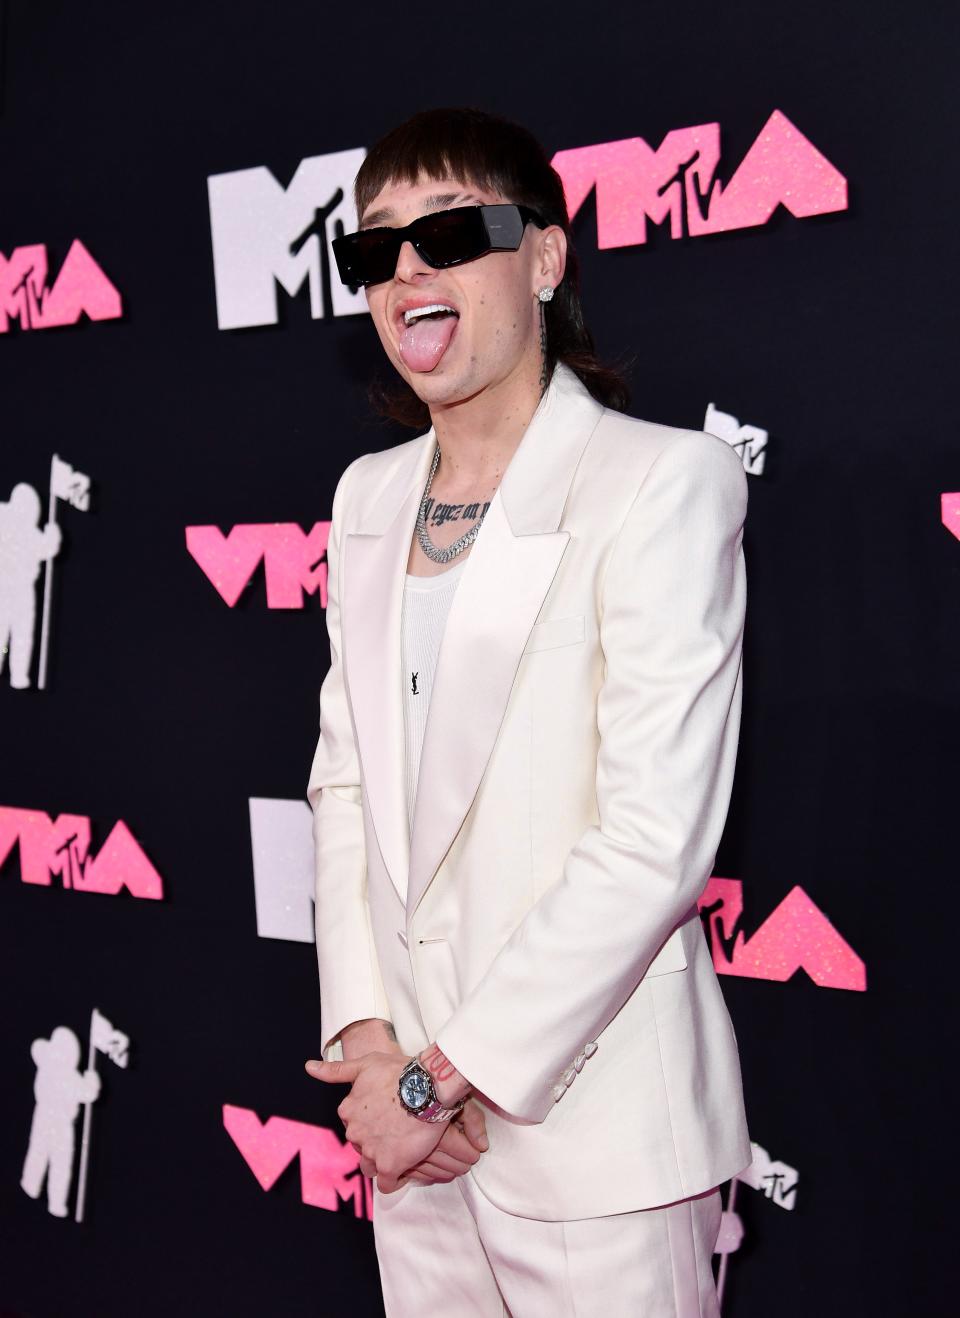 Peso Pluma attends the 2023 MTV Video Music Awards at Prudential Center on September 12, 2023 in Newark, New Jersey.